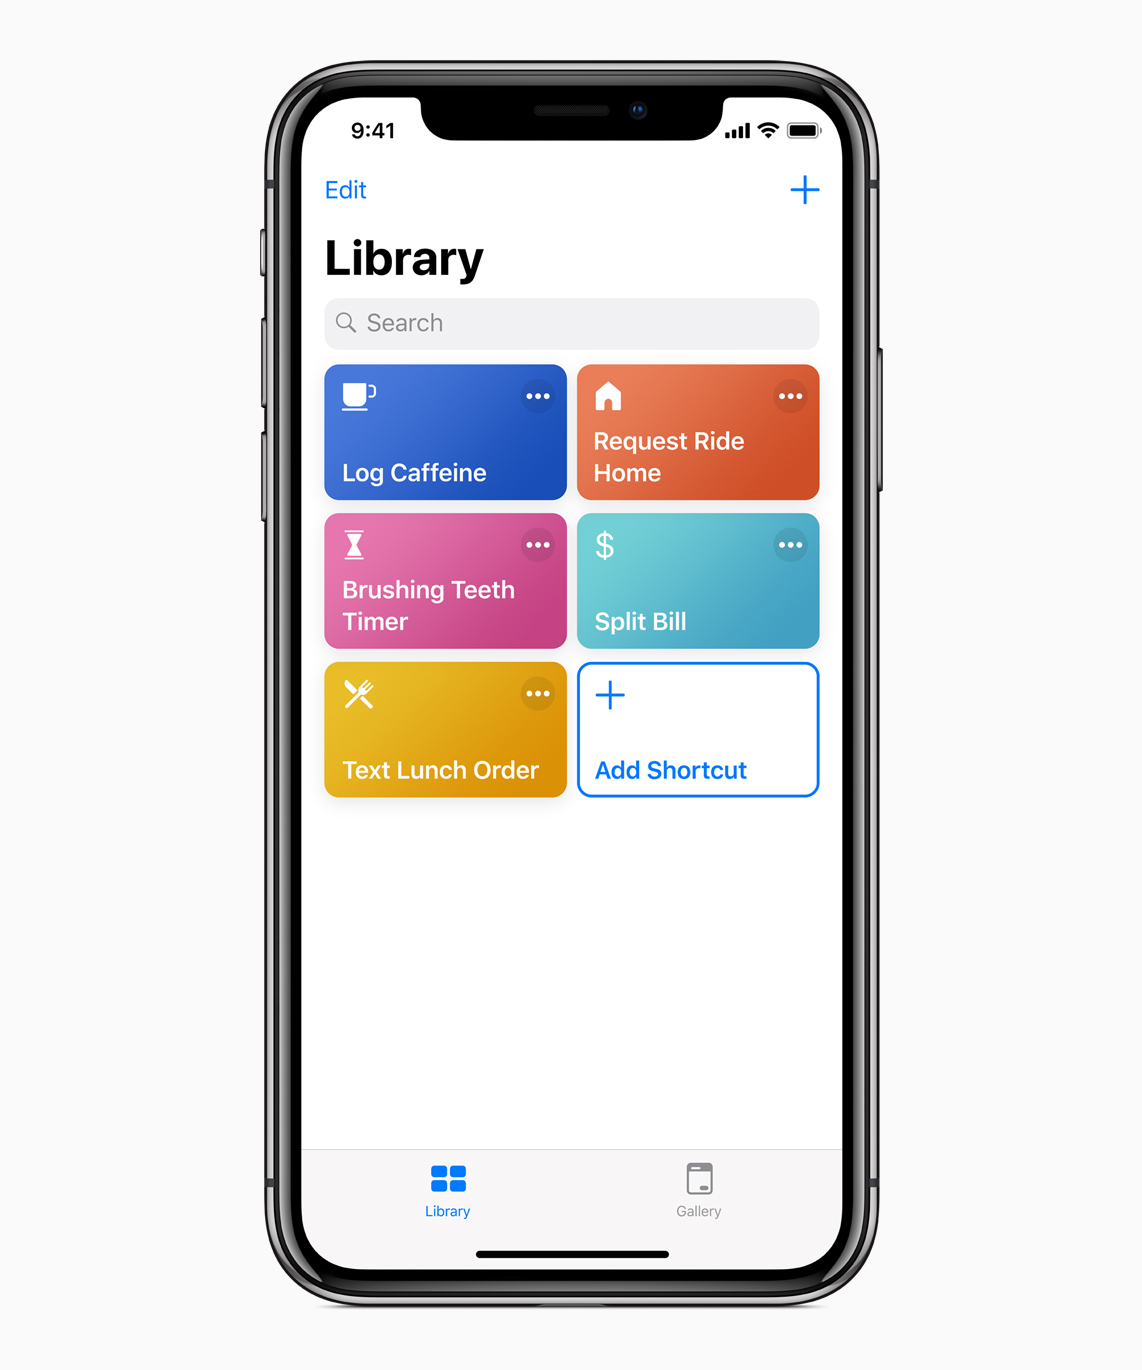 Apple Launches Shortcuts App Beta for Developers